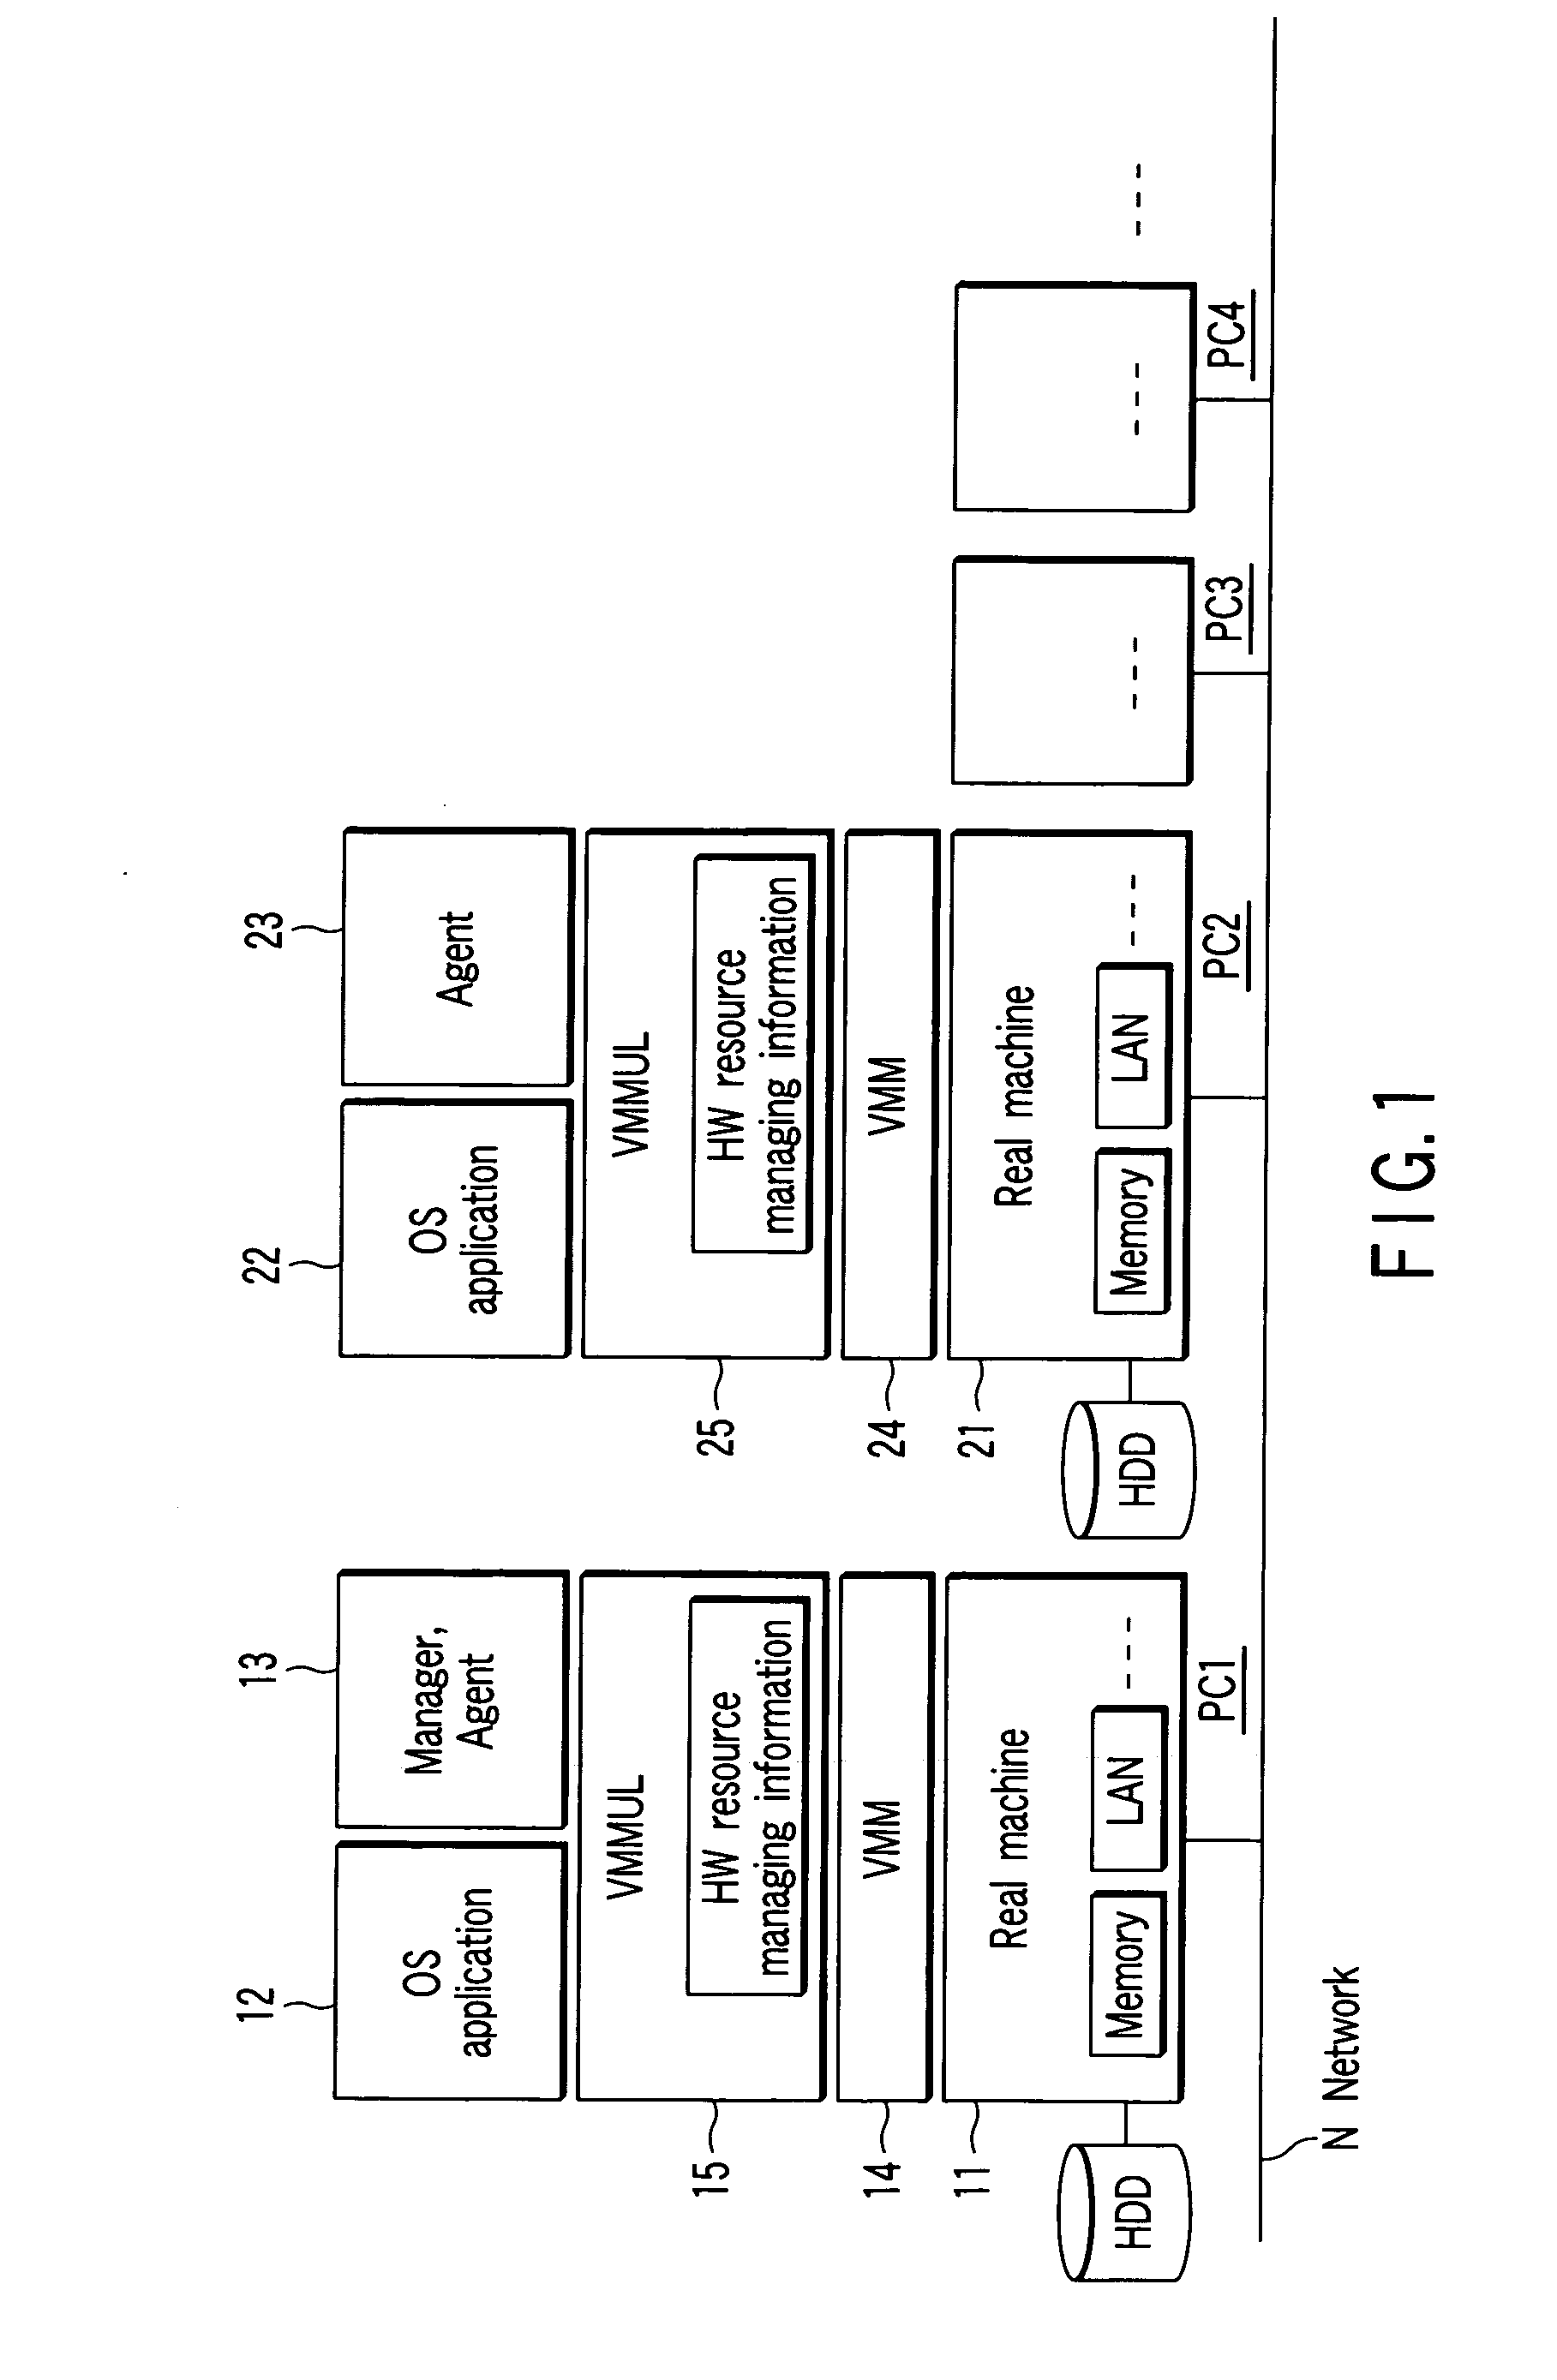 Apparatus and method for carrying out information processing by virtualization